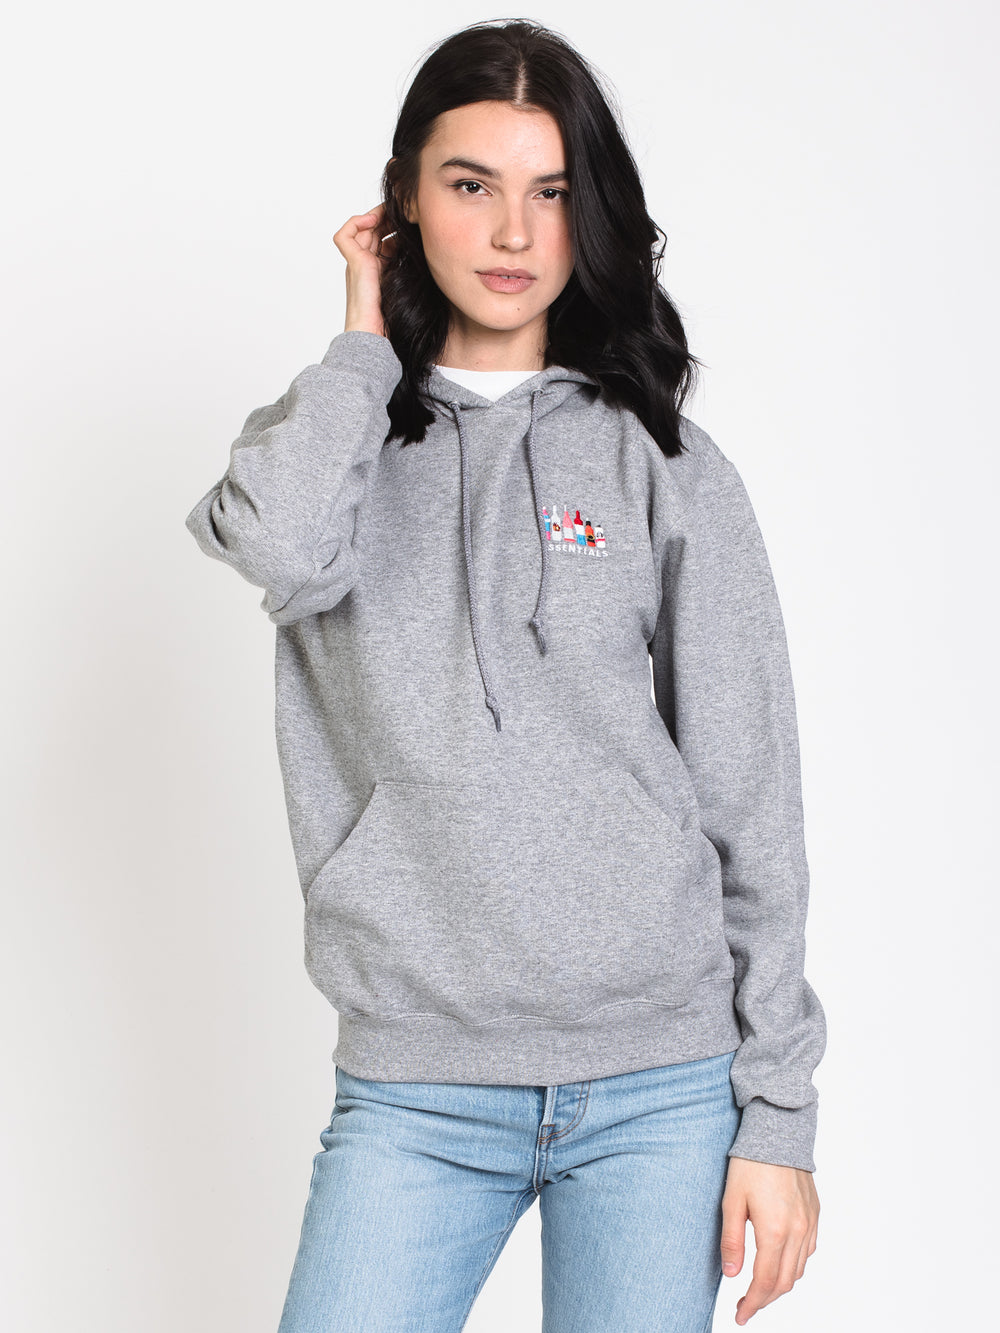 HOTLINE APPAREL UNISEX ESSENTIALONG SLEEVE EMBROIDERED HOODIE - GRY - CLEARANCE